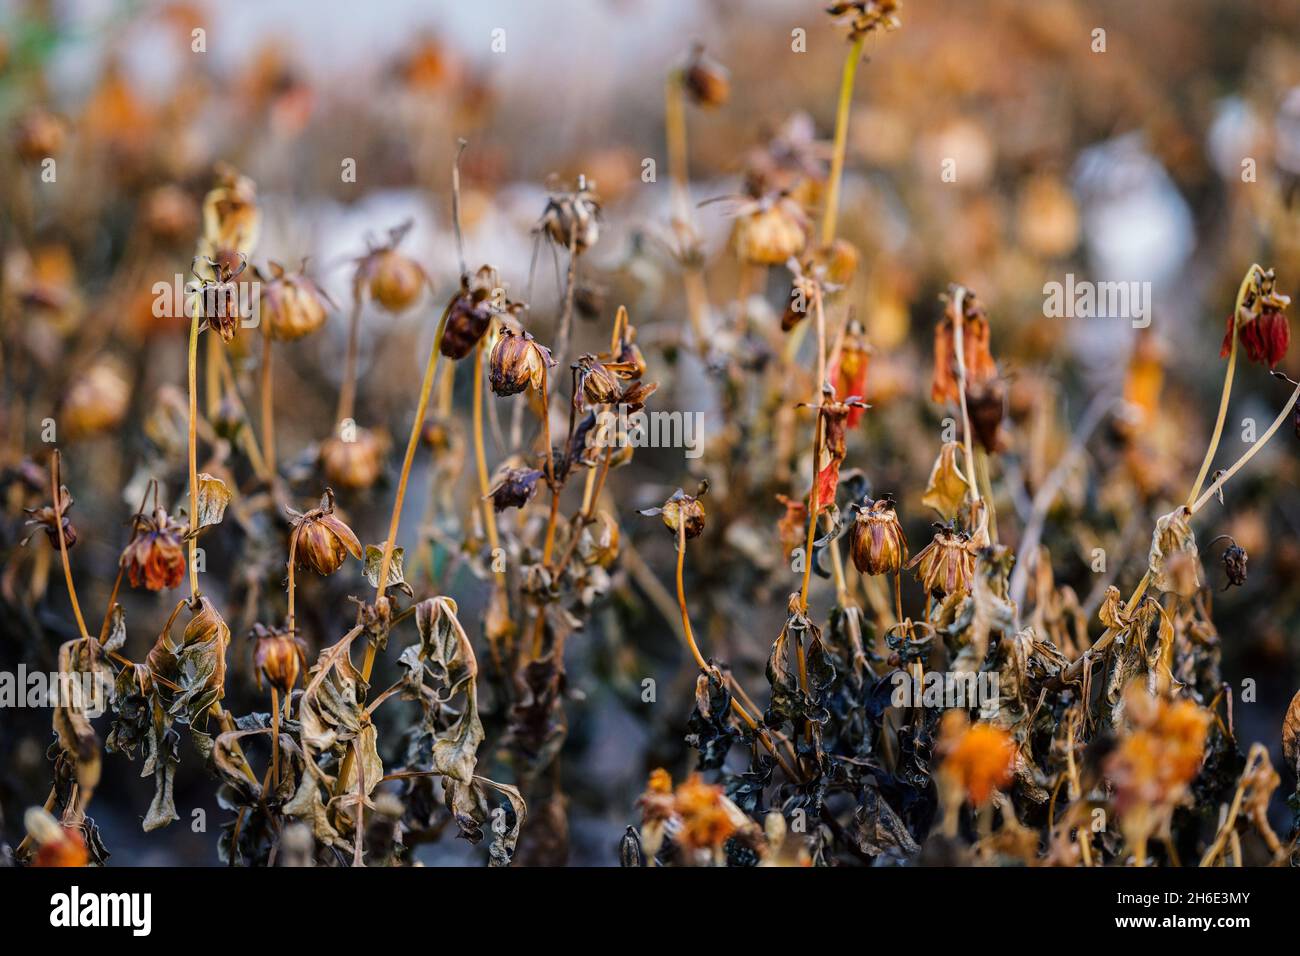 Withered flowers. In the autumn garden at sunset. Selective focus with shallow depth of field. Stock Photo